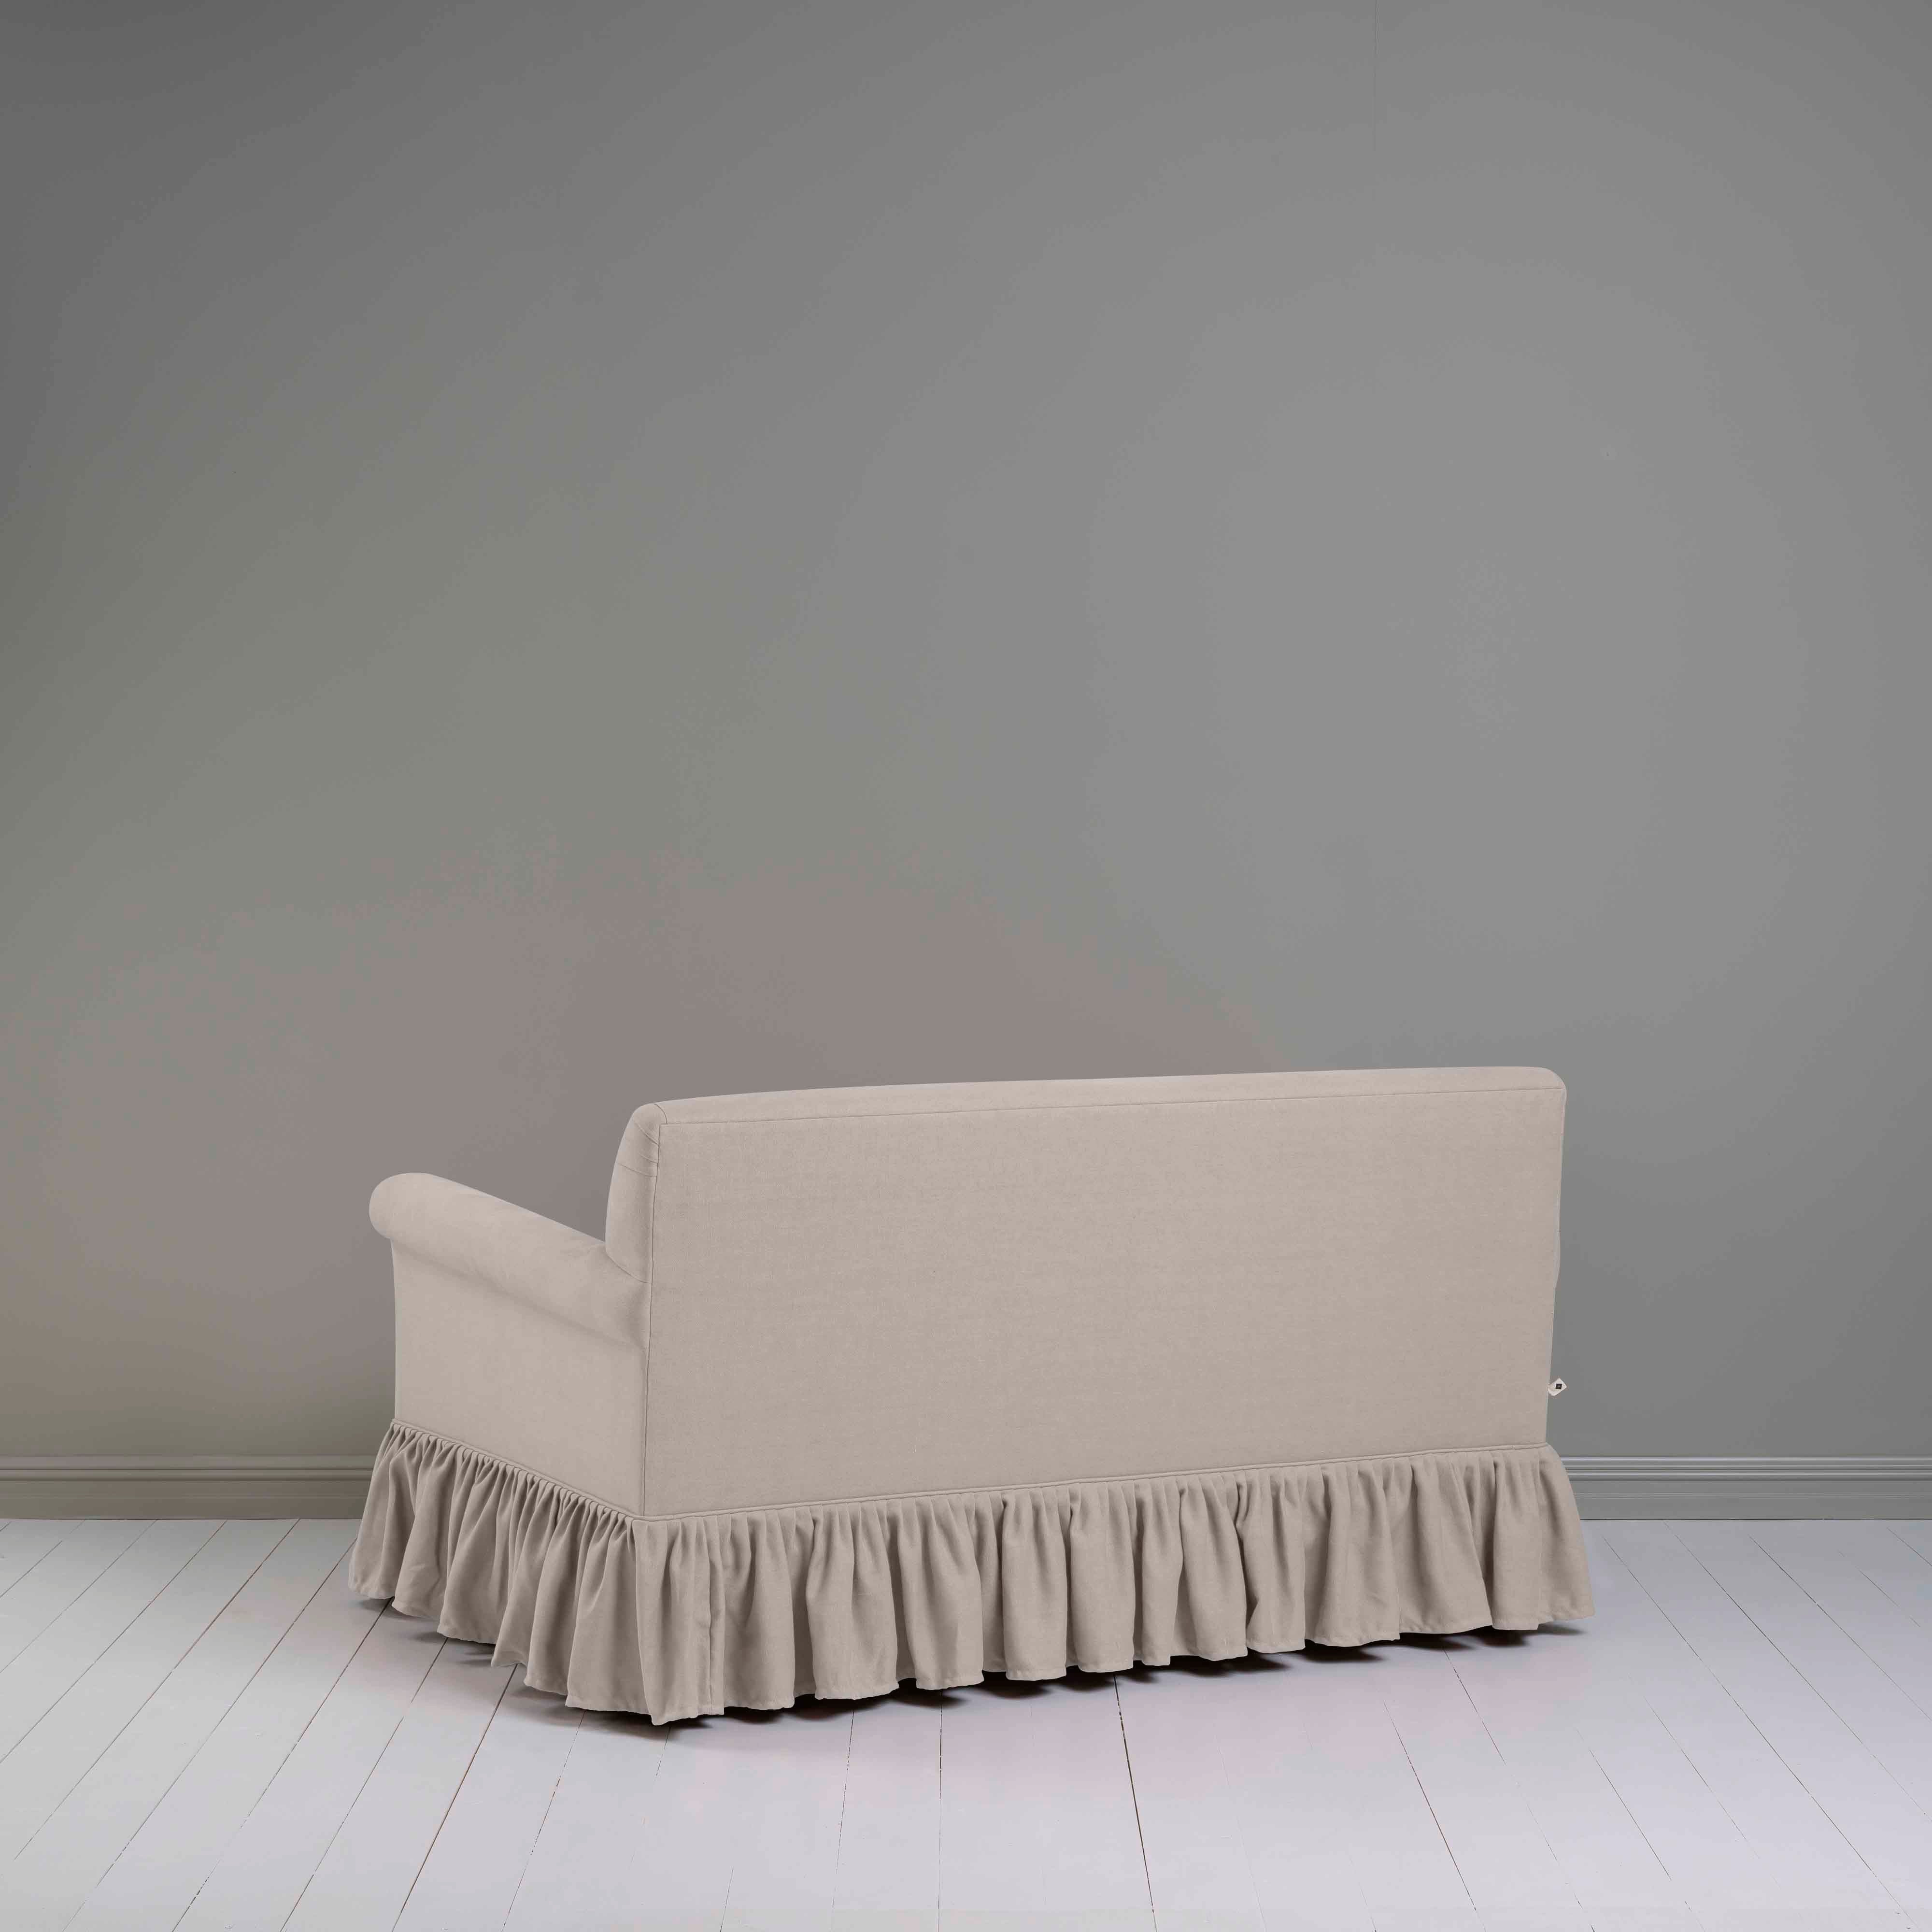  Curtain Call 2 Seater Sofa in Laidback Linen Pearl Grey 